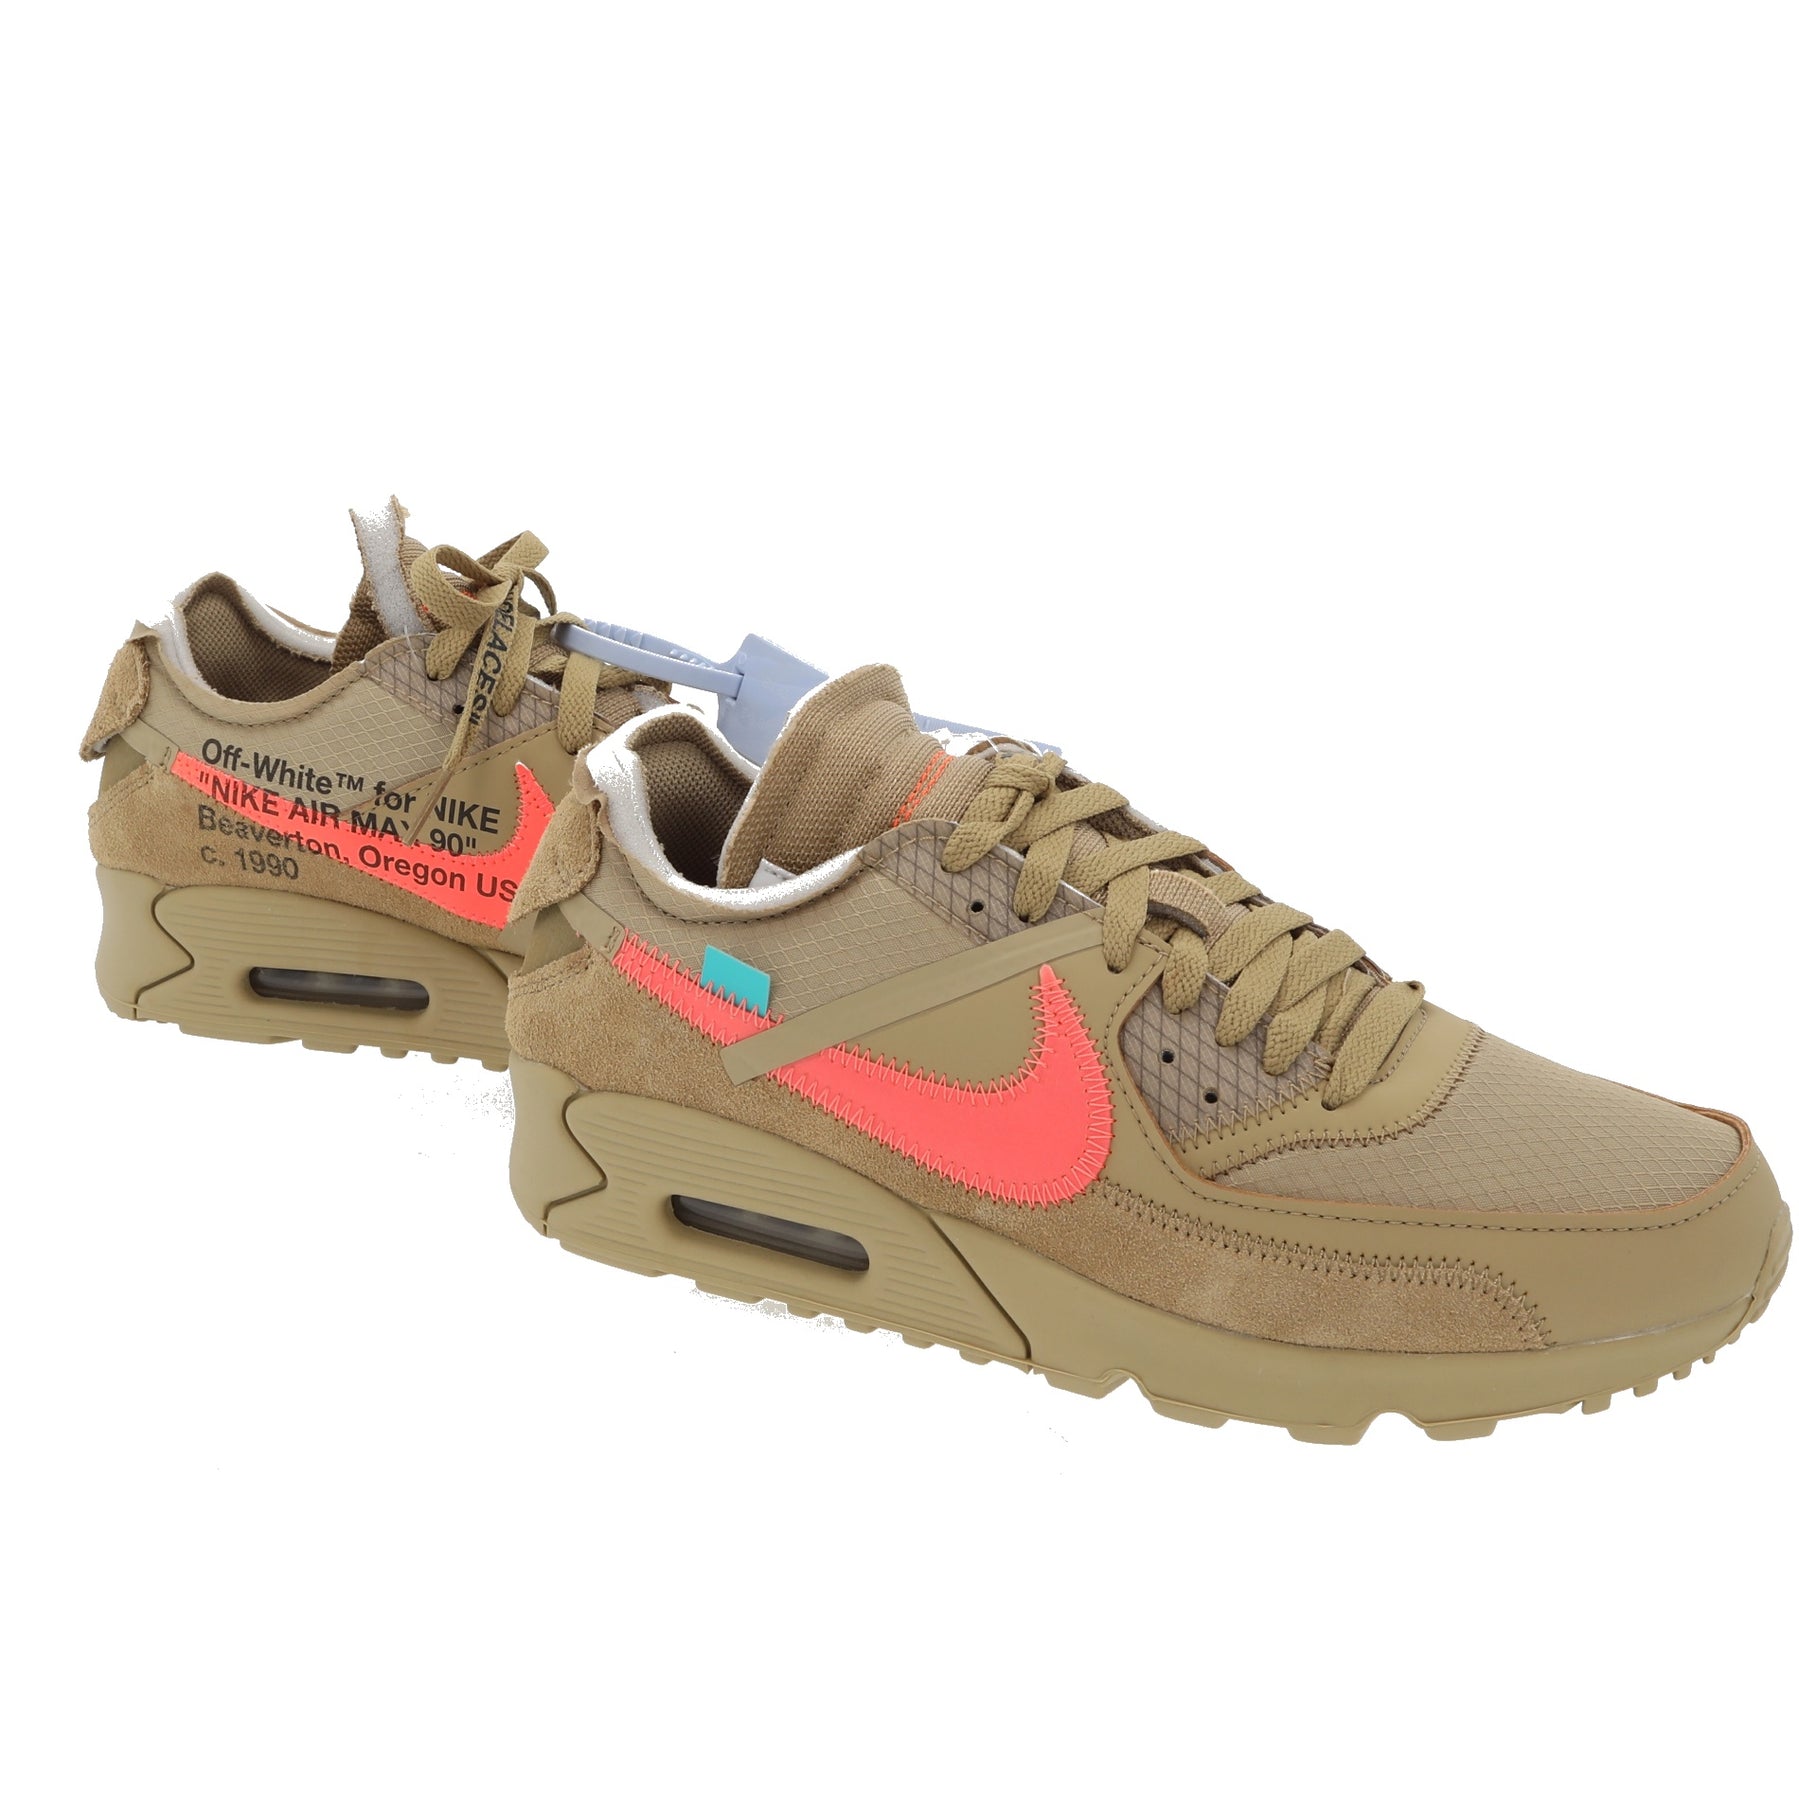 Nike X Off-White The 10: Air Max 90 Off-White/Desert Ore Sneakers -  Farfetch